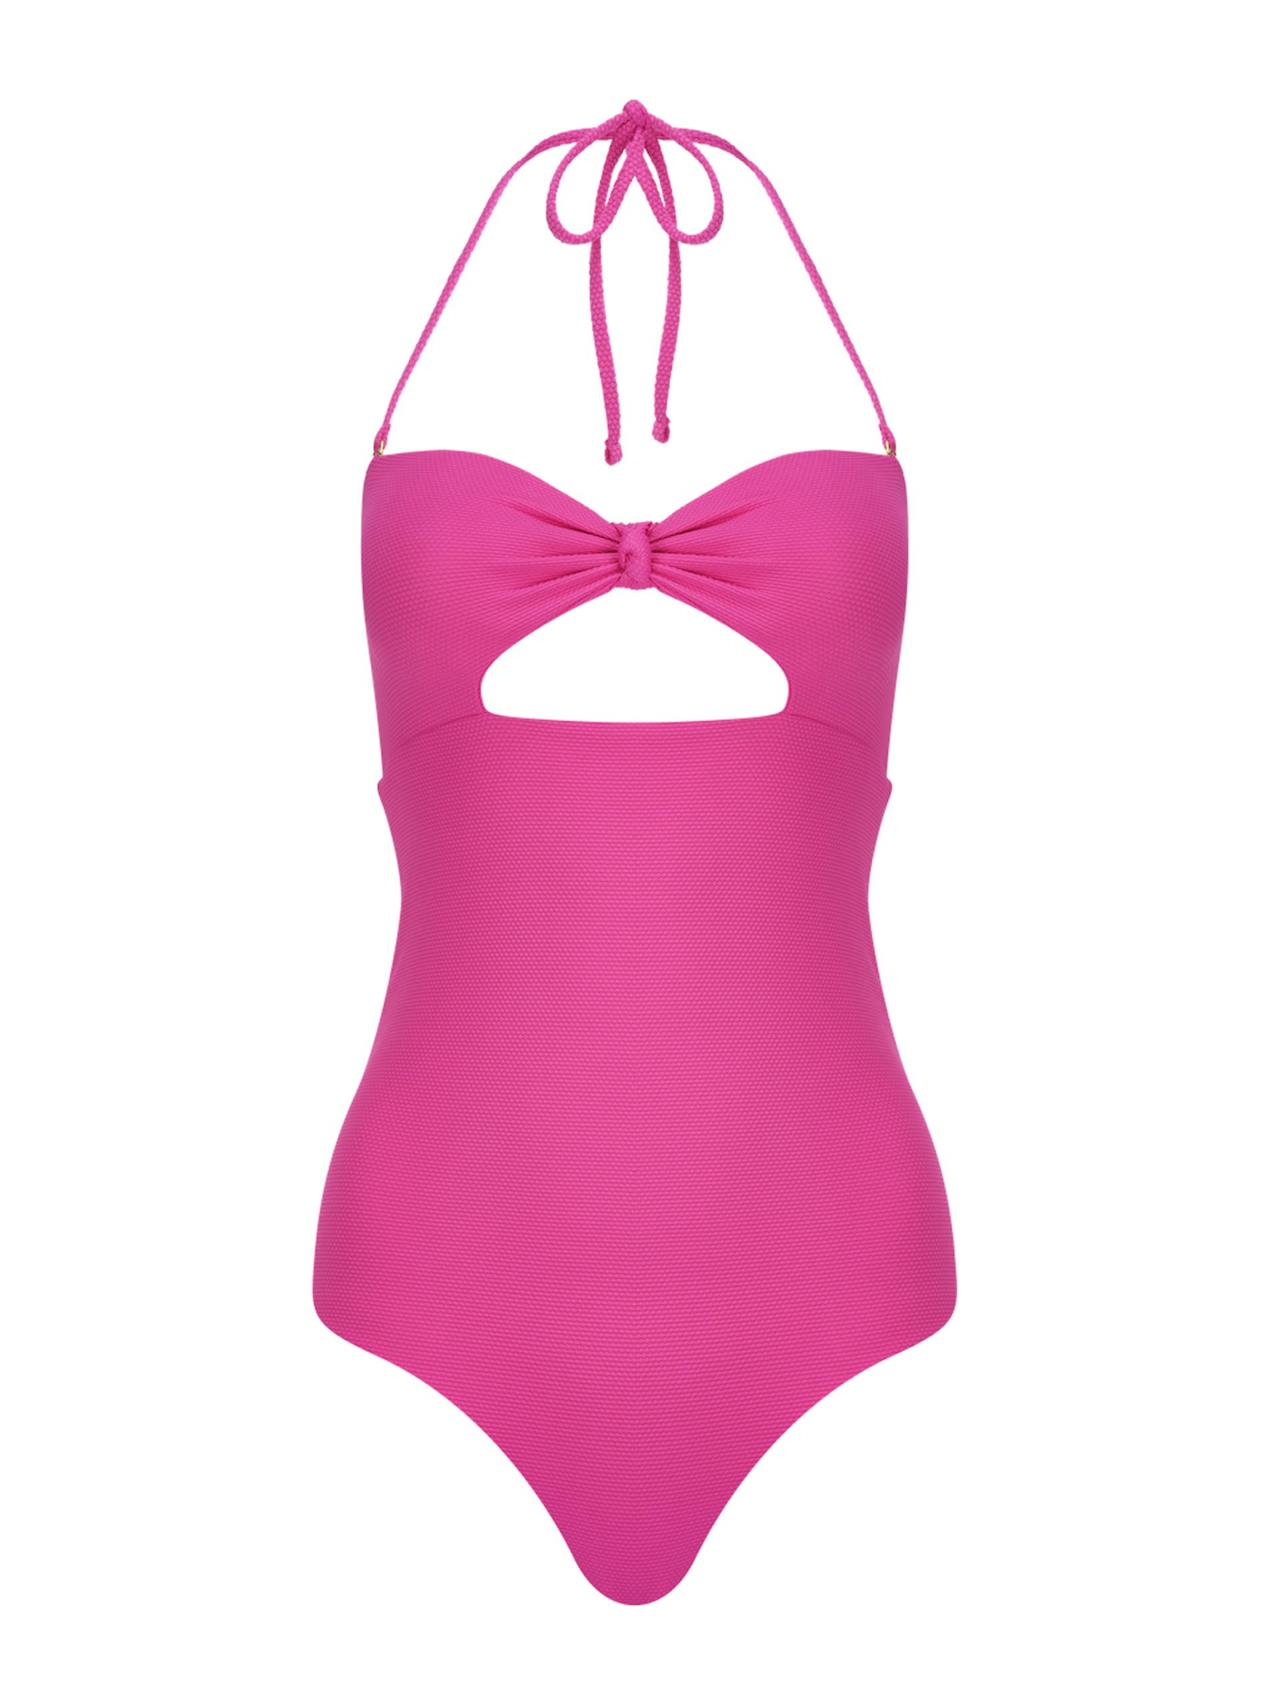 The Chazzy swimsuit in fuchsia